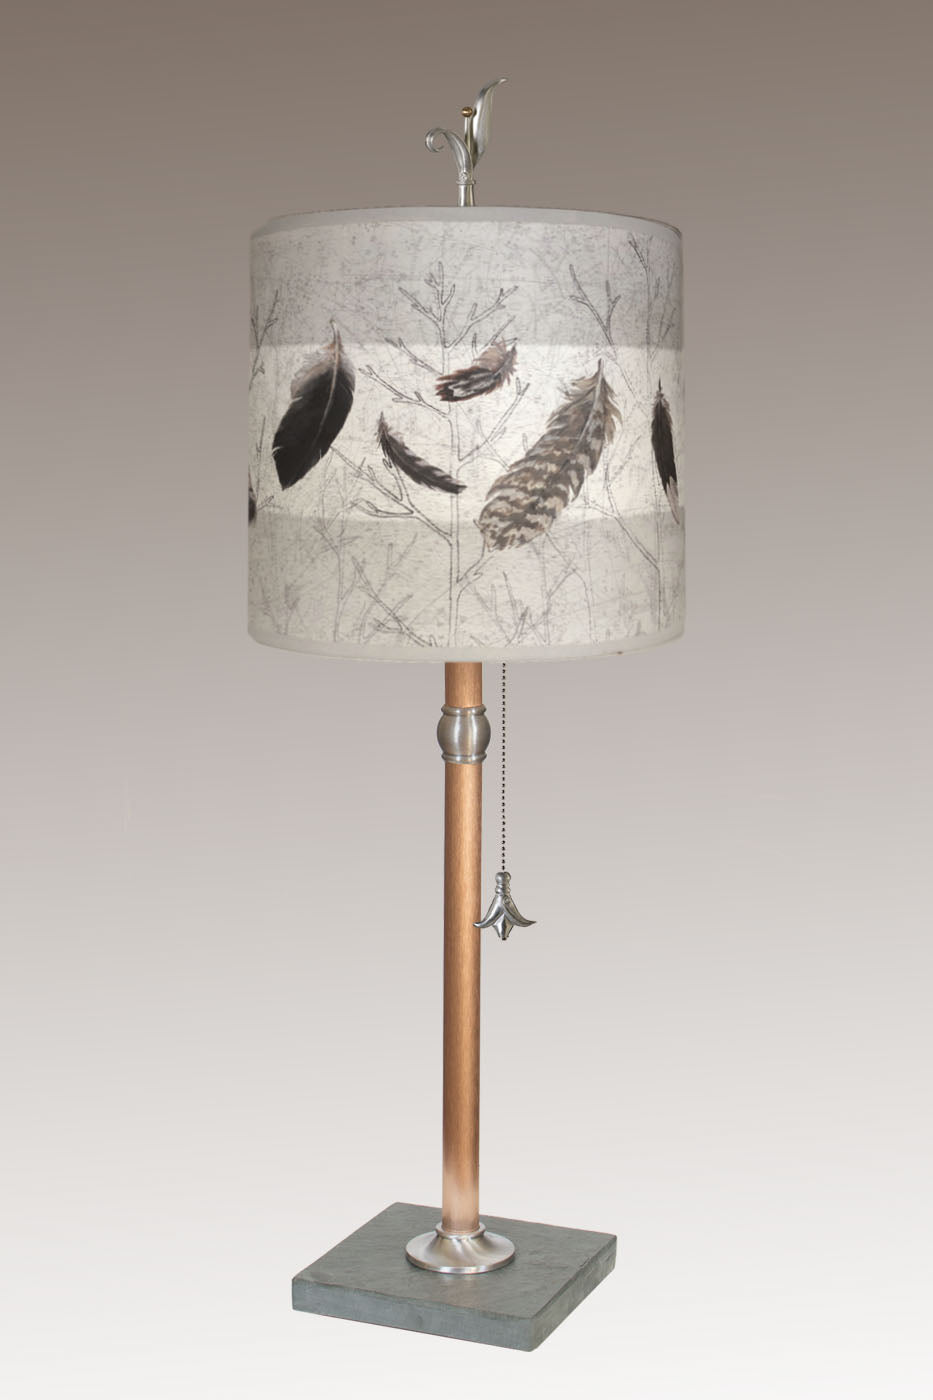 Janna Ugone & Co Table Lamps Copper Table Lamp with Medium Drum Shade in Feathers in Pebble